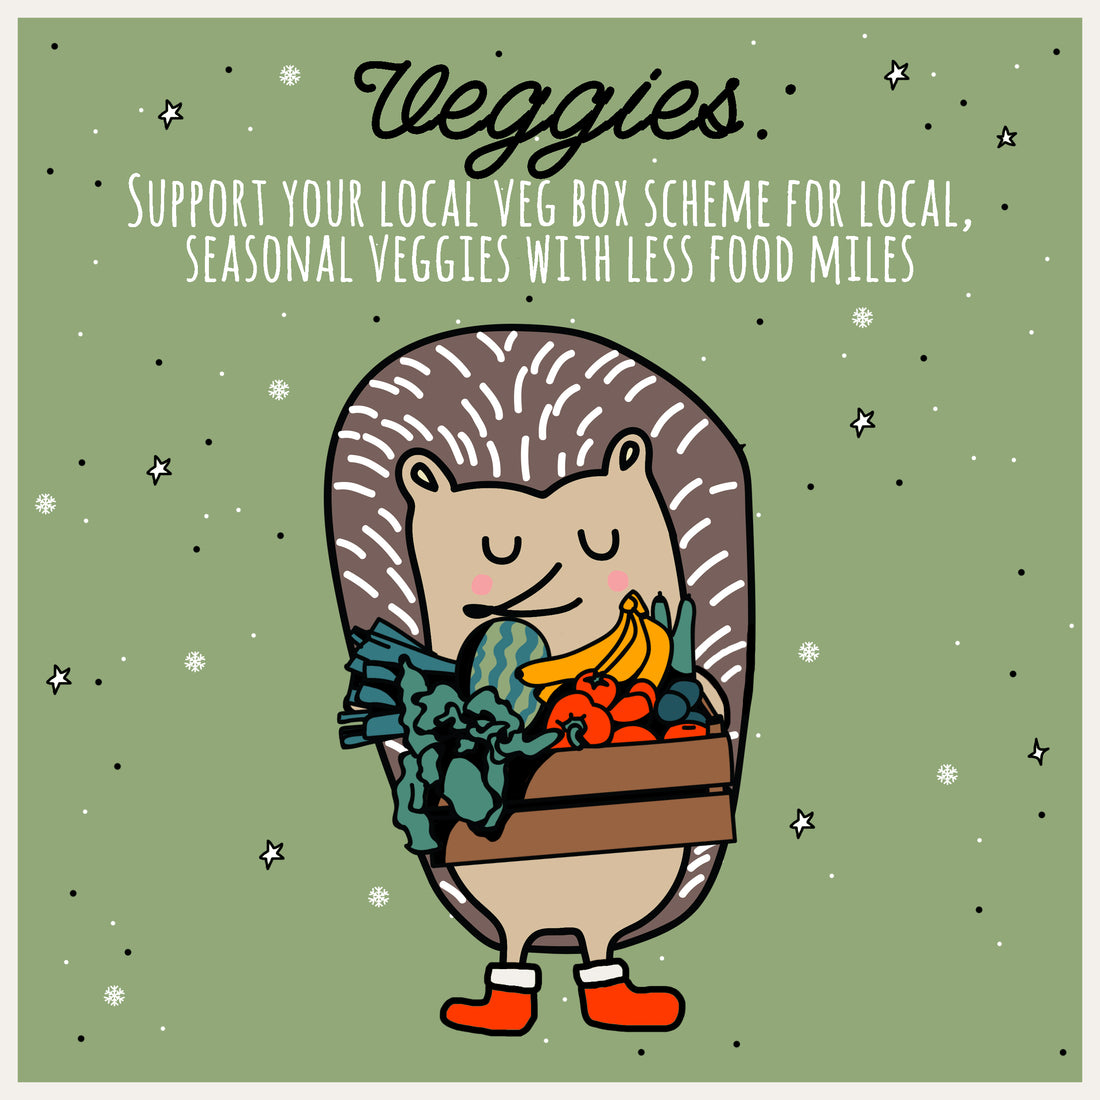 Mindful Mintie says "Support your Local Veg Box Scheme"